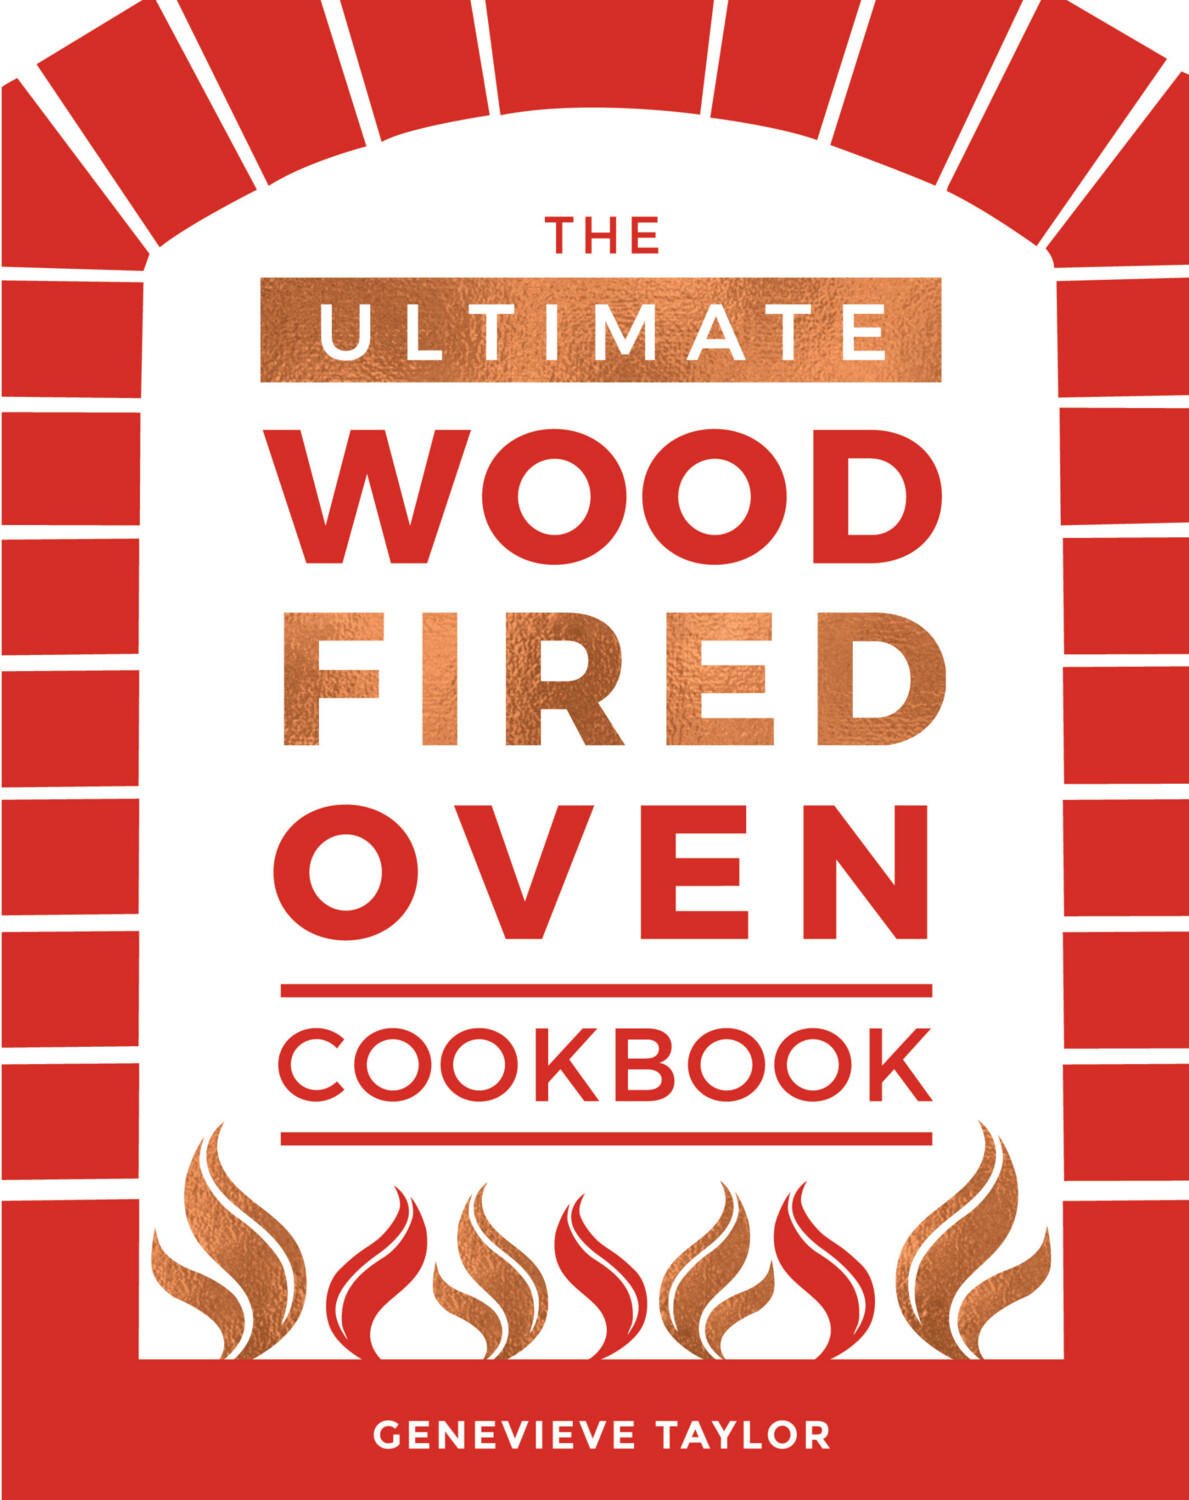 The Ultimate Wood Fired Oven Cookbook